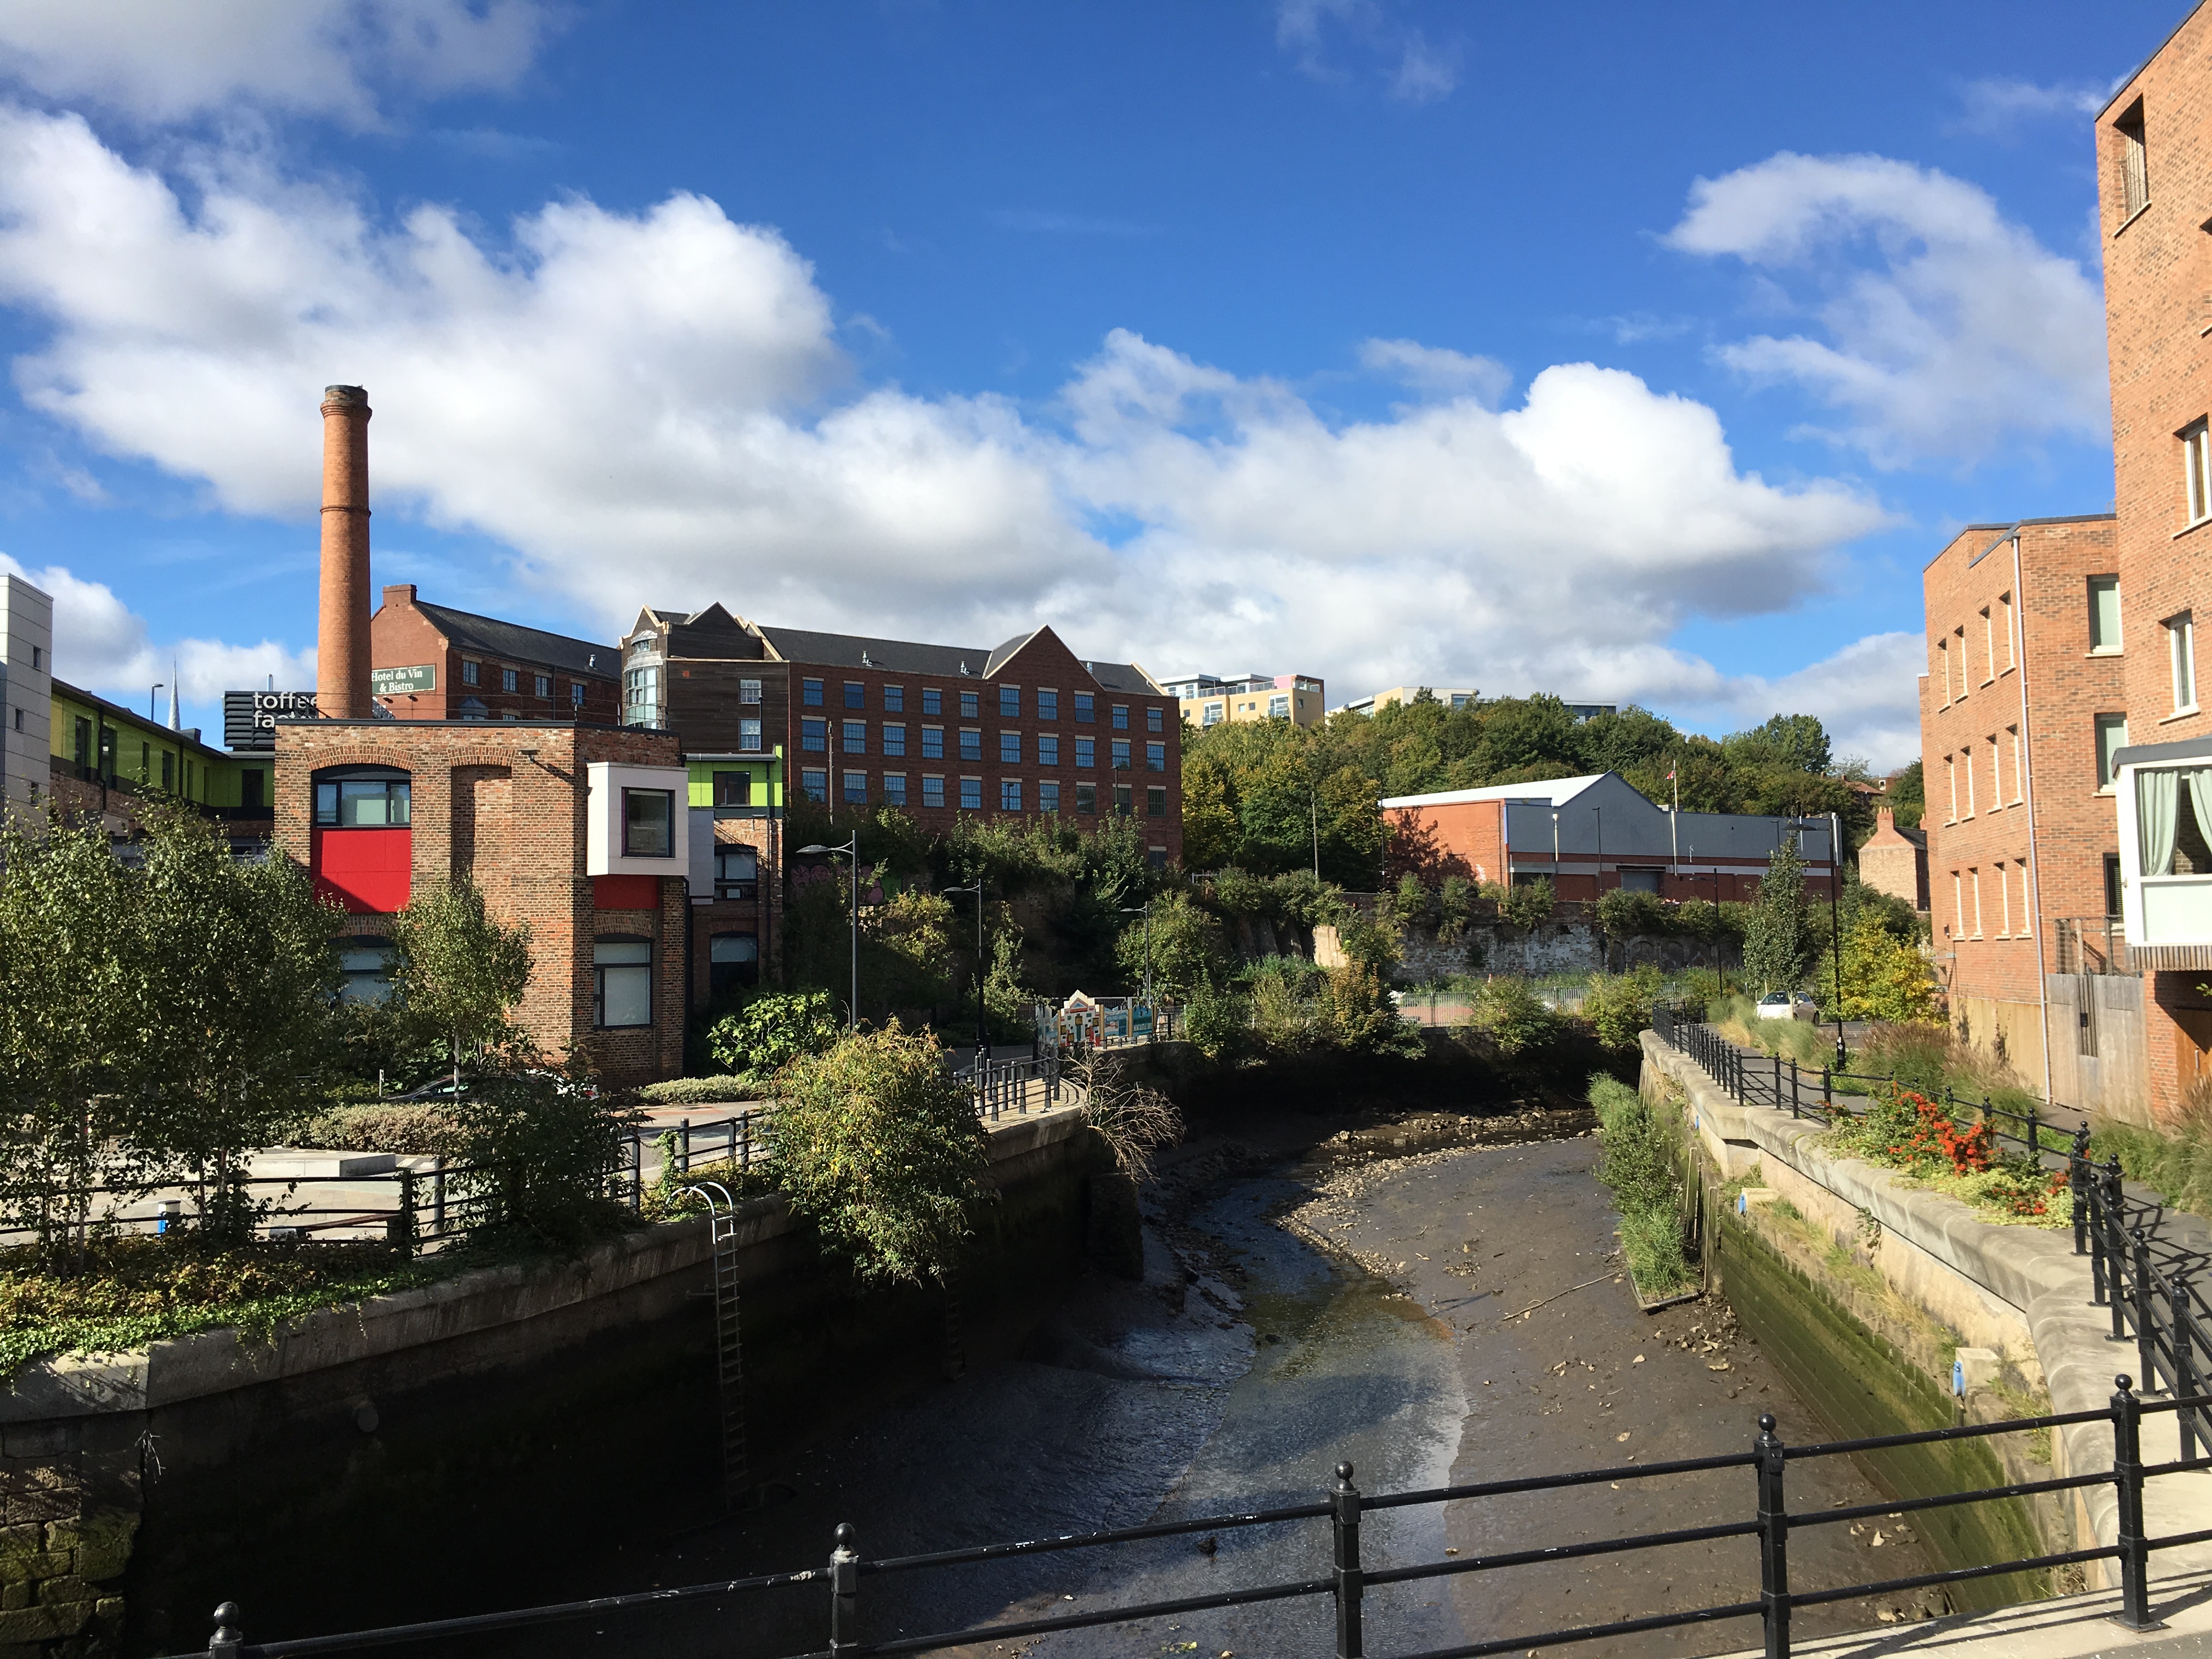 photo showing the lower Ouseburn flowing through an urban area with flats and old factory building